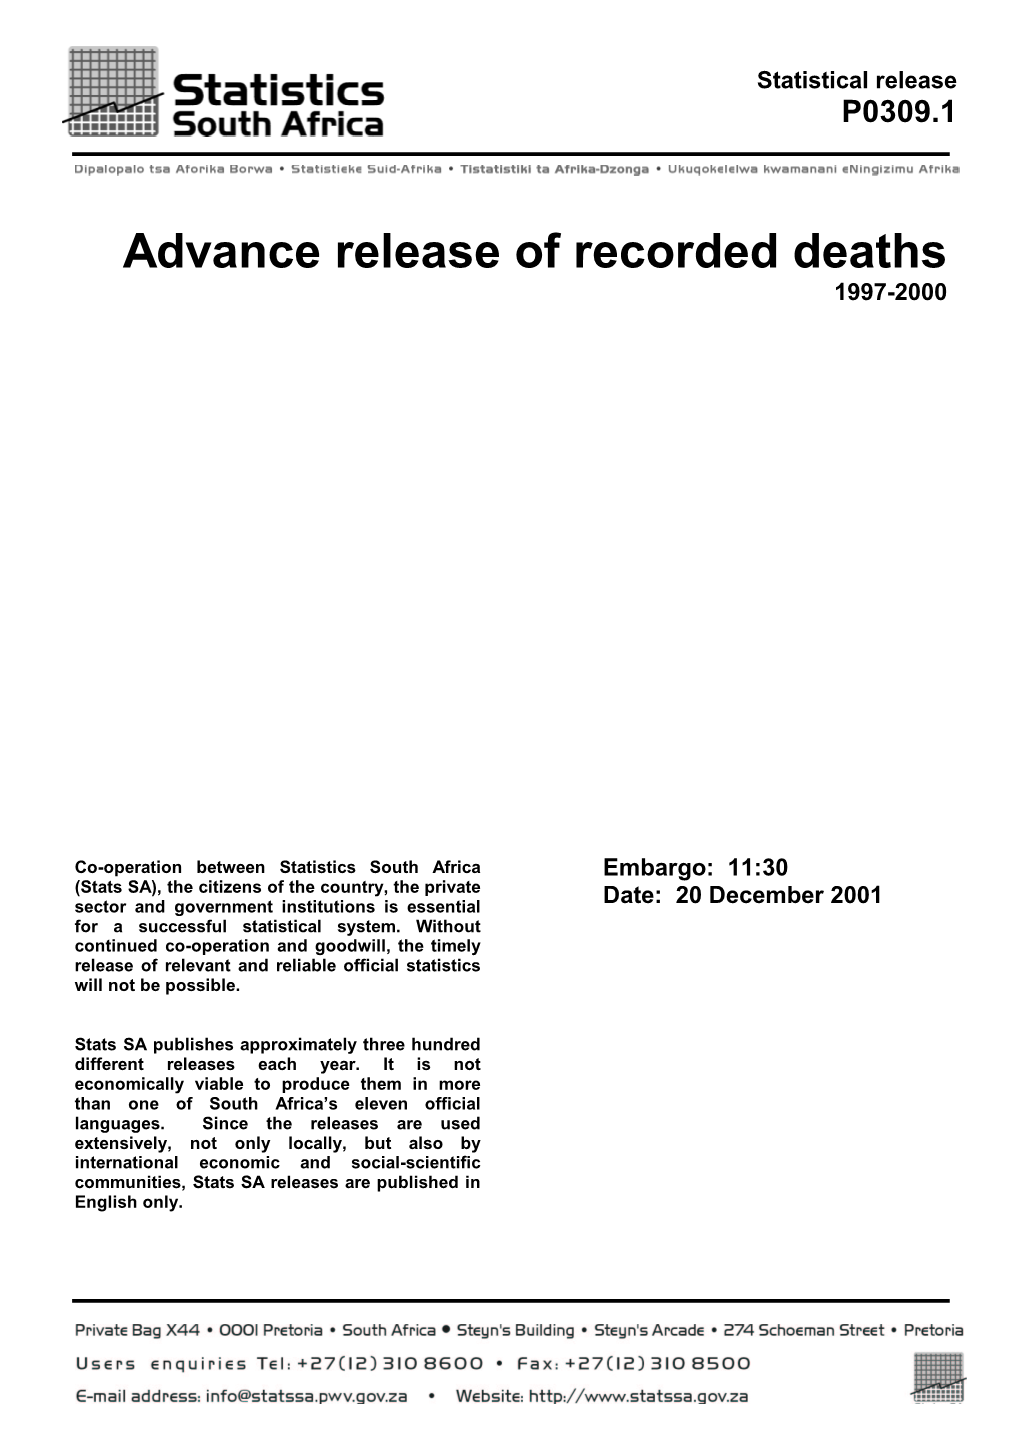 Advance Release of Recorded Deaths 1997-2000